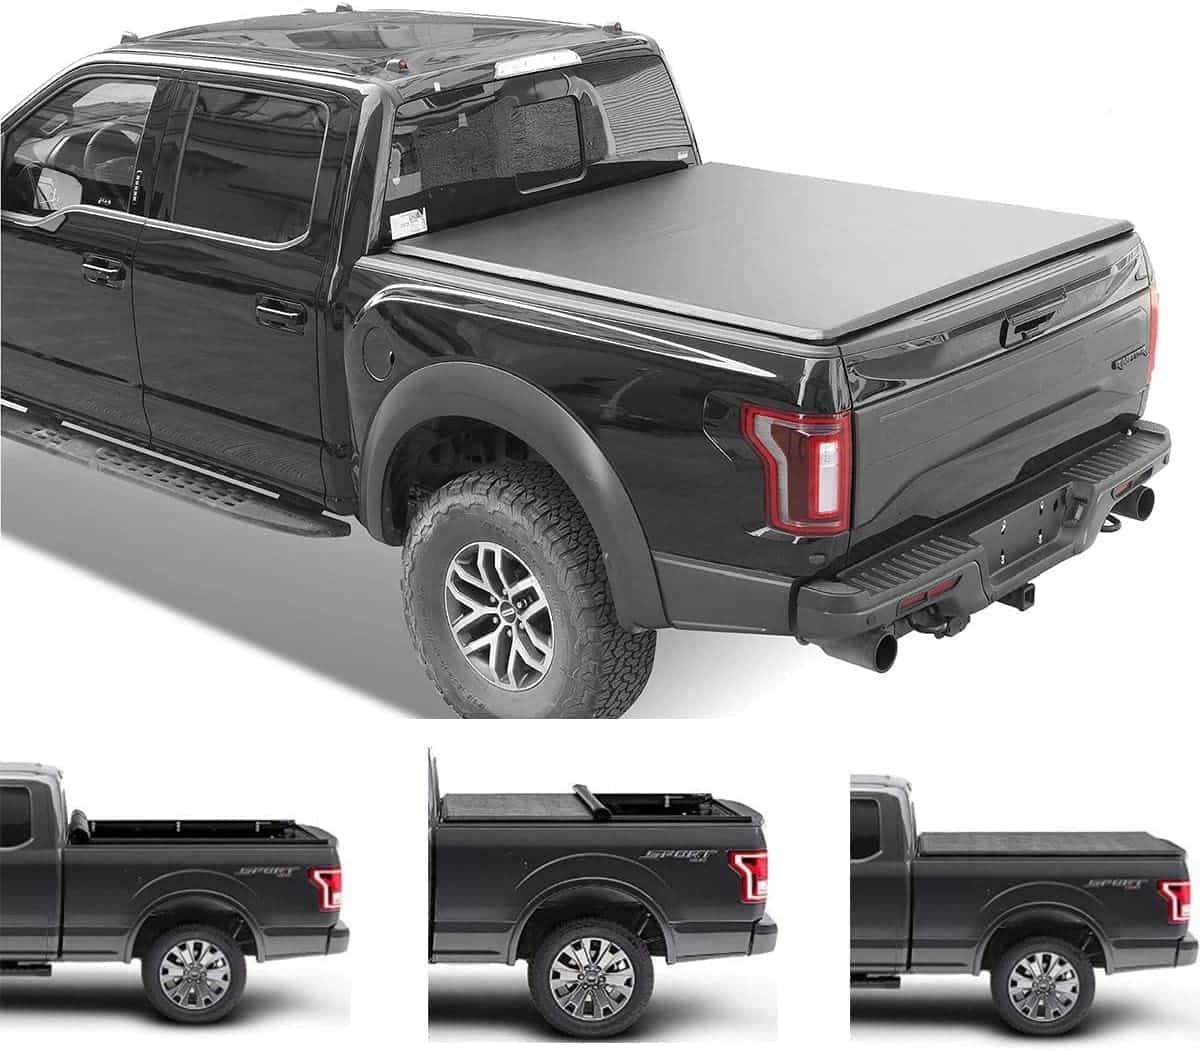 Upgrade Your Honda Ridgeline With The Best Tonneau Cover Today!